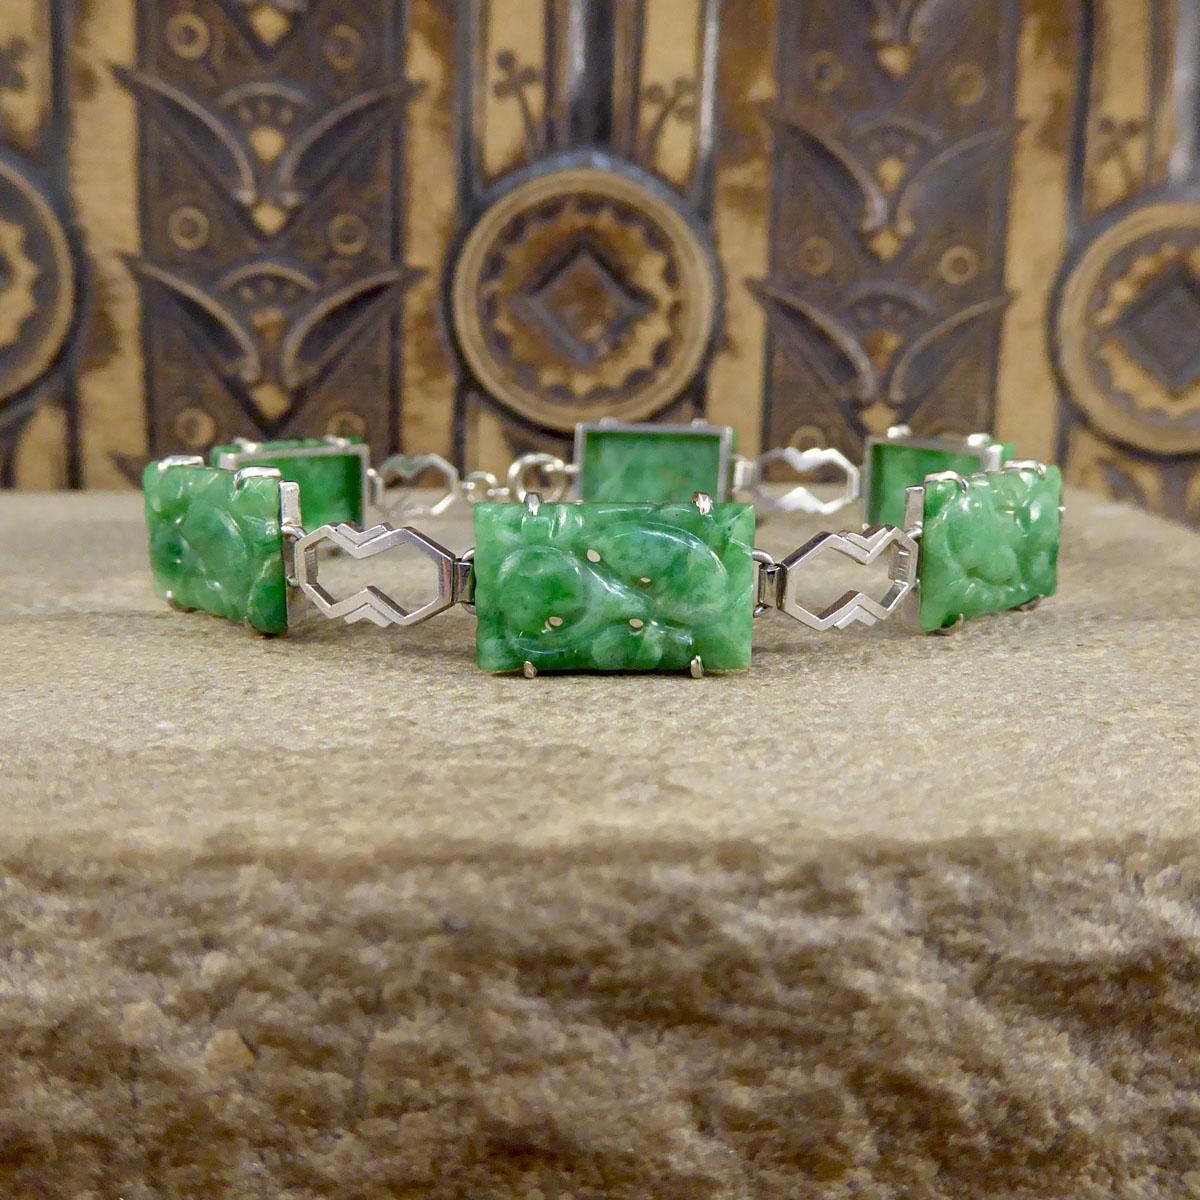 This gorgeous Art Deco bracelet features 6 panels of natural jade throughout with 9ct White Gold links between. The rectangular Jadeites are carved in a floral pattern, each one has three or four small holes through each panel as part of the floral